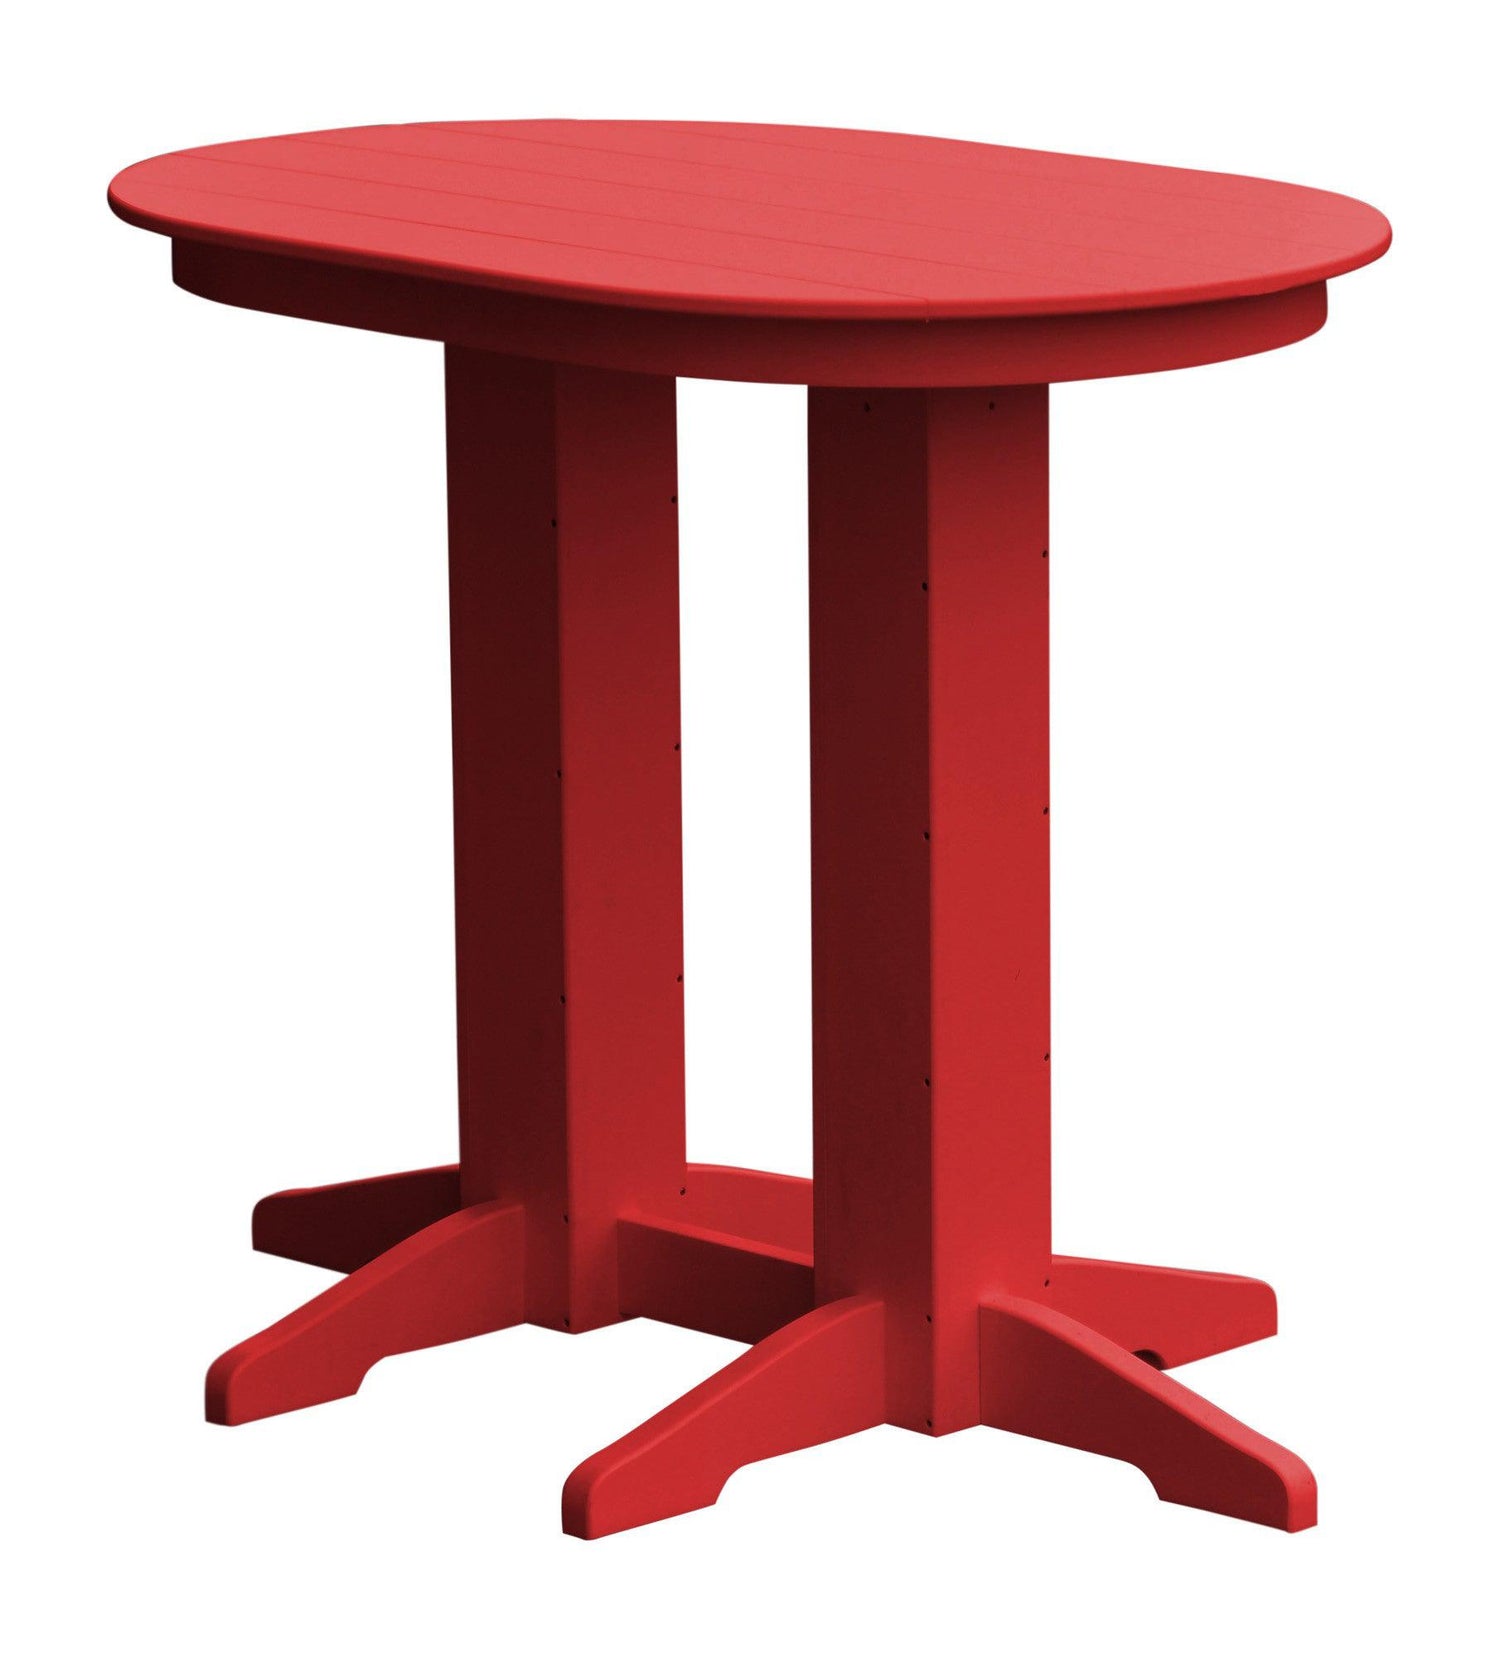 A&L Furniture Recycled Plastic Bar Height Oval Table Collection